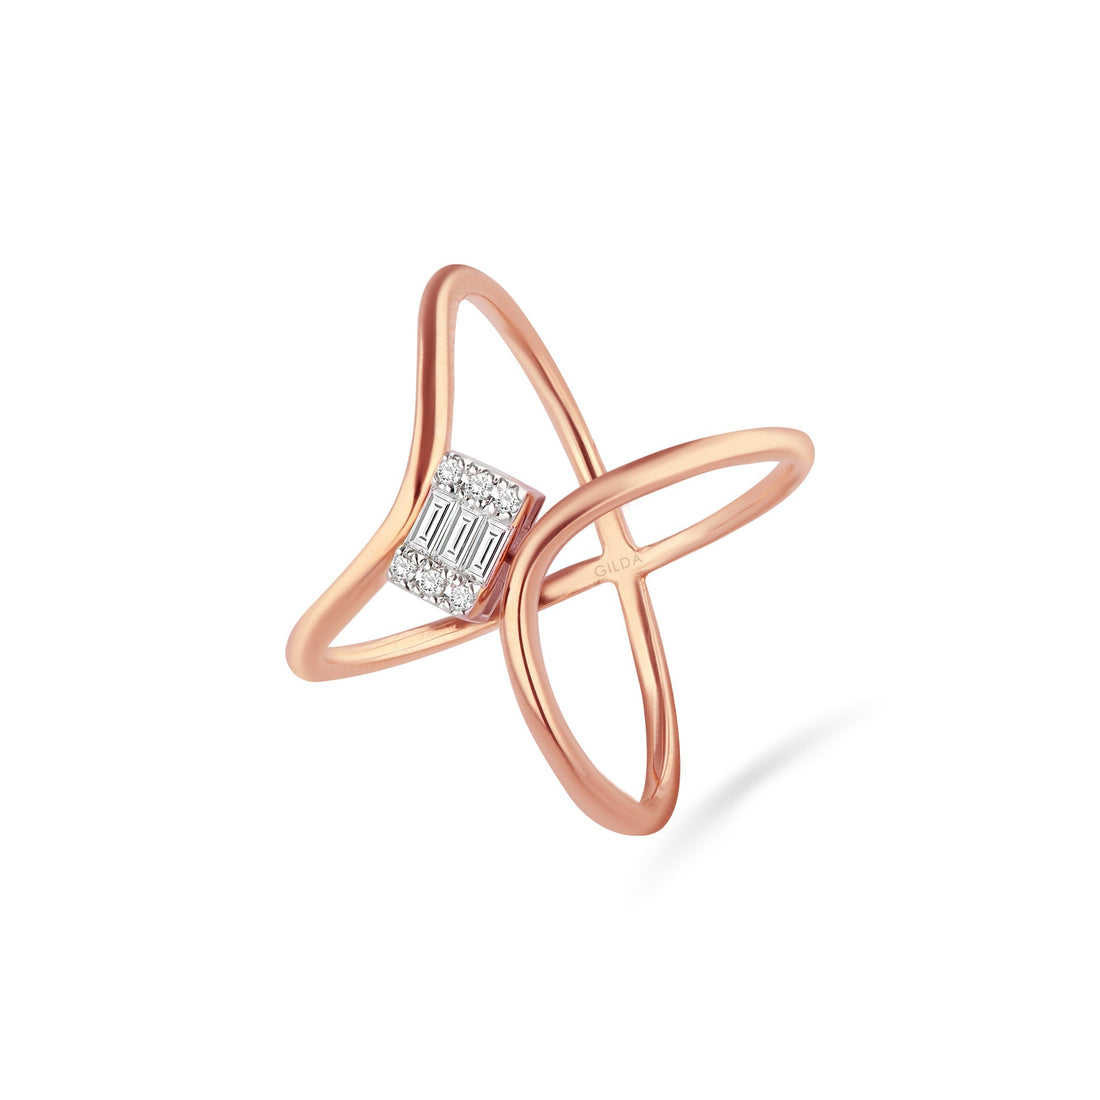 Jewelry Spin | Diamond Ring | 0.13 Cts. | 14K Gold - Rose / 6 / Diamonds - ring Zengoda Shop online from Artisan